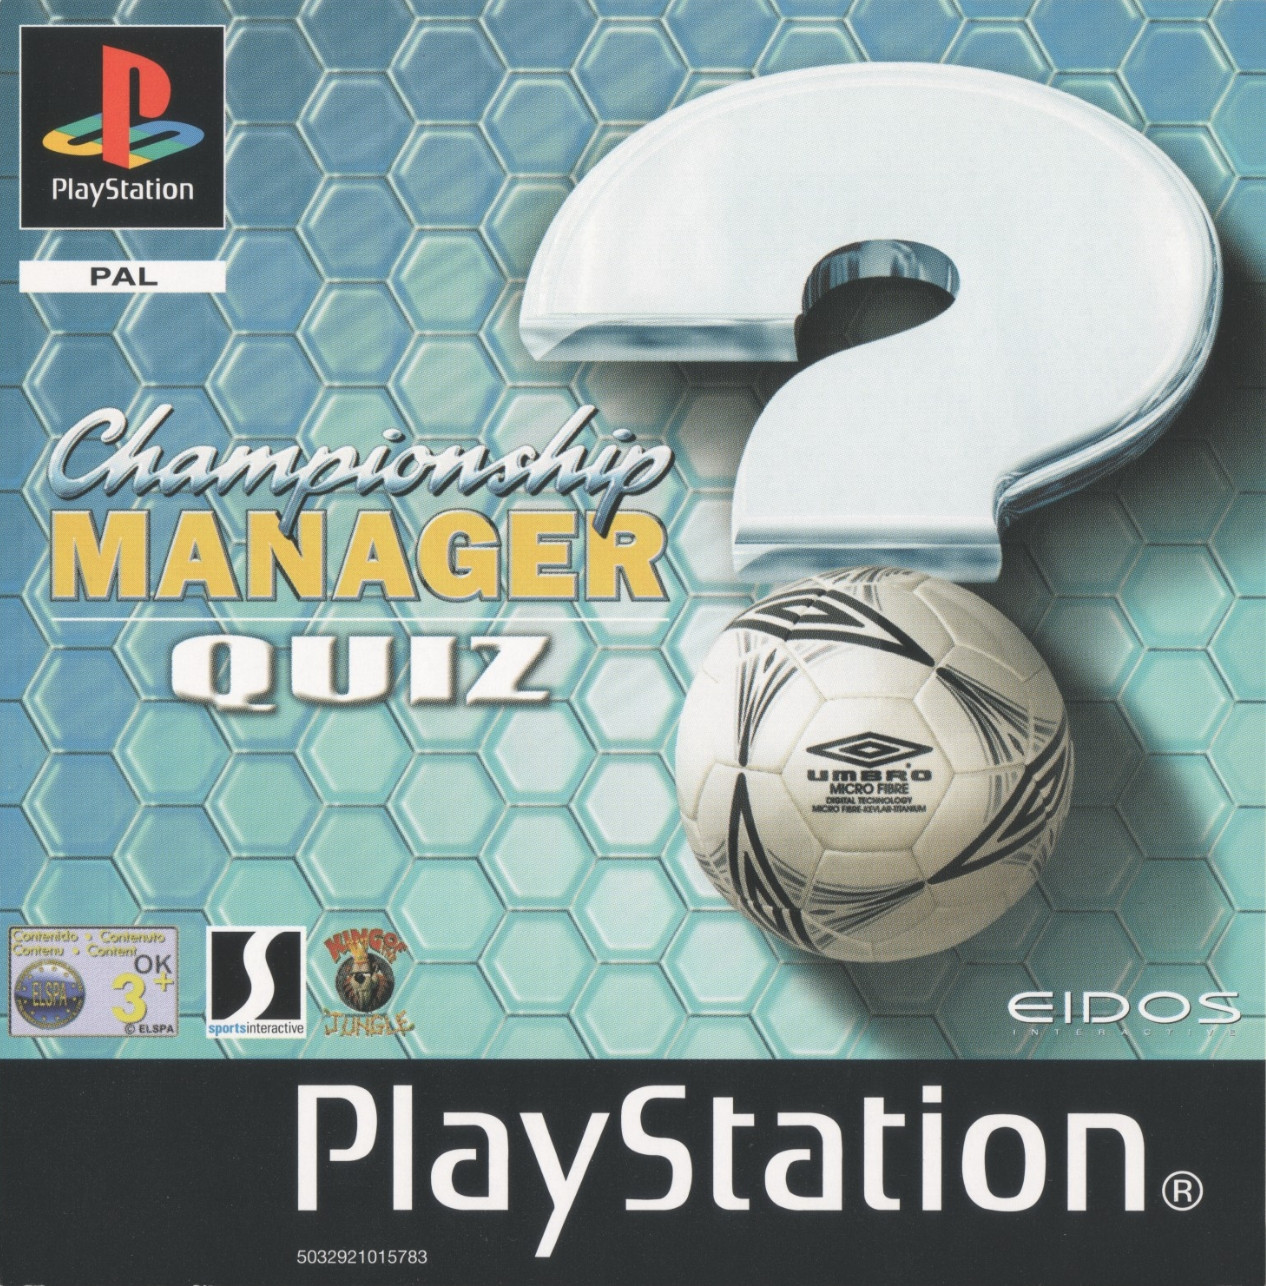 Image of Championship Manager Quiz